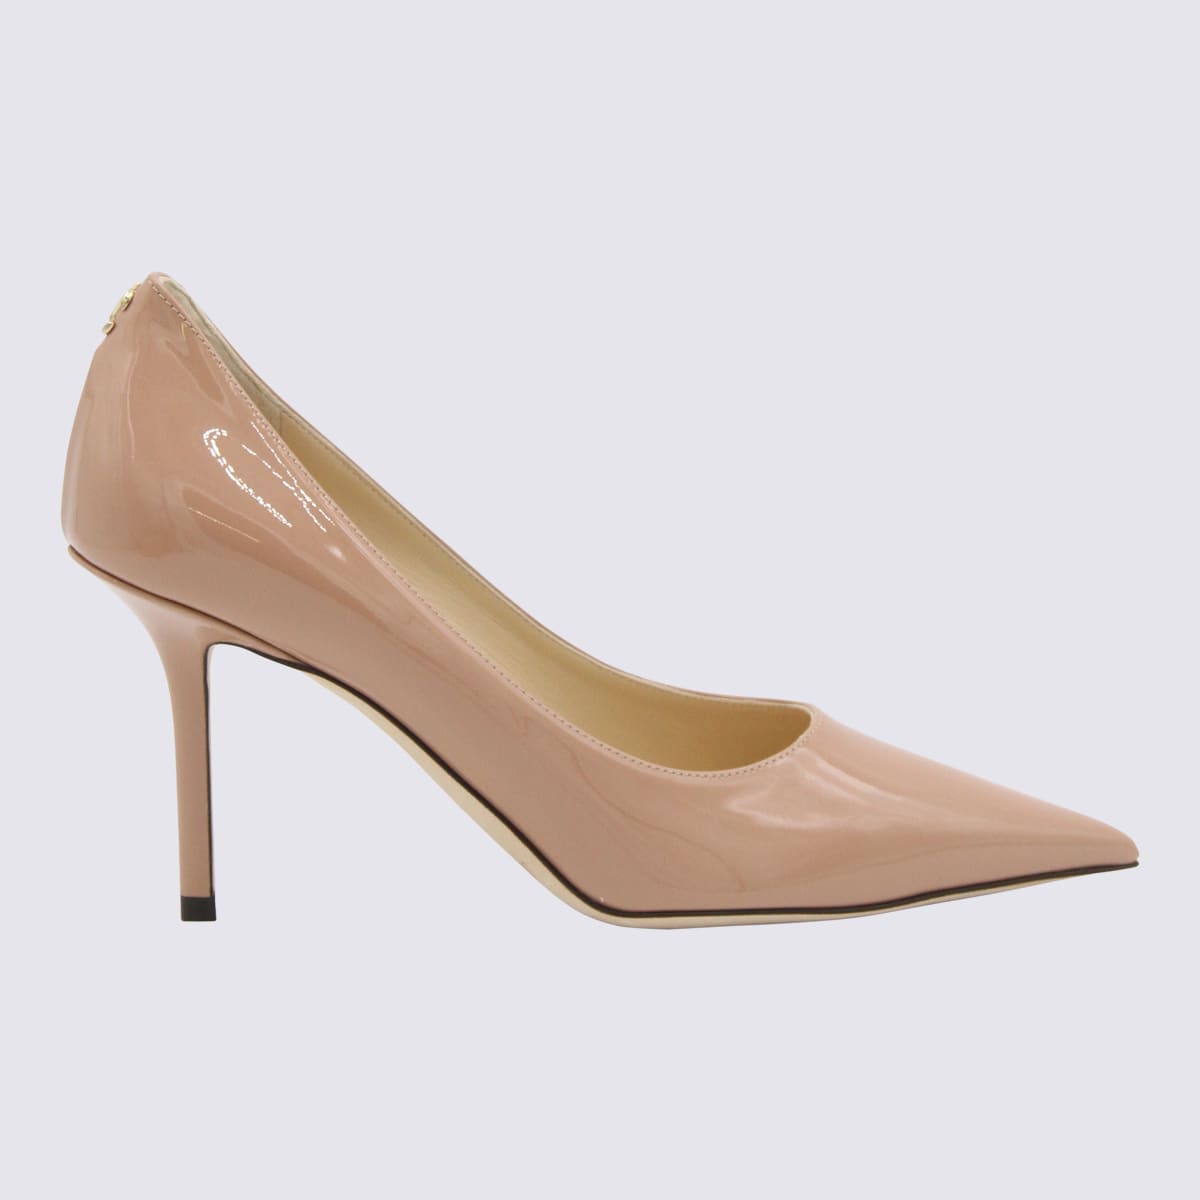 JIMMY CHOO PINK PATENT LEATHER LOVE 85 MM PUMPS